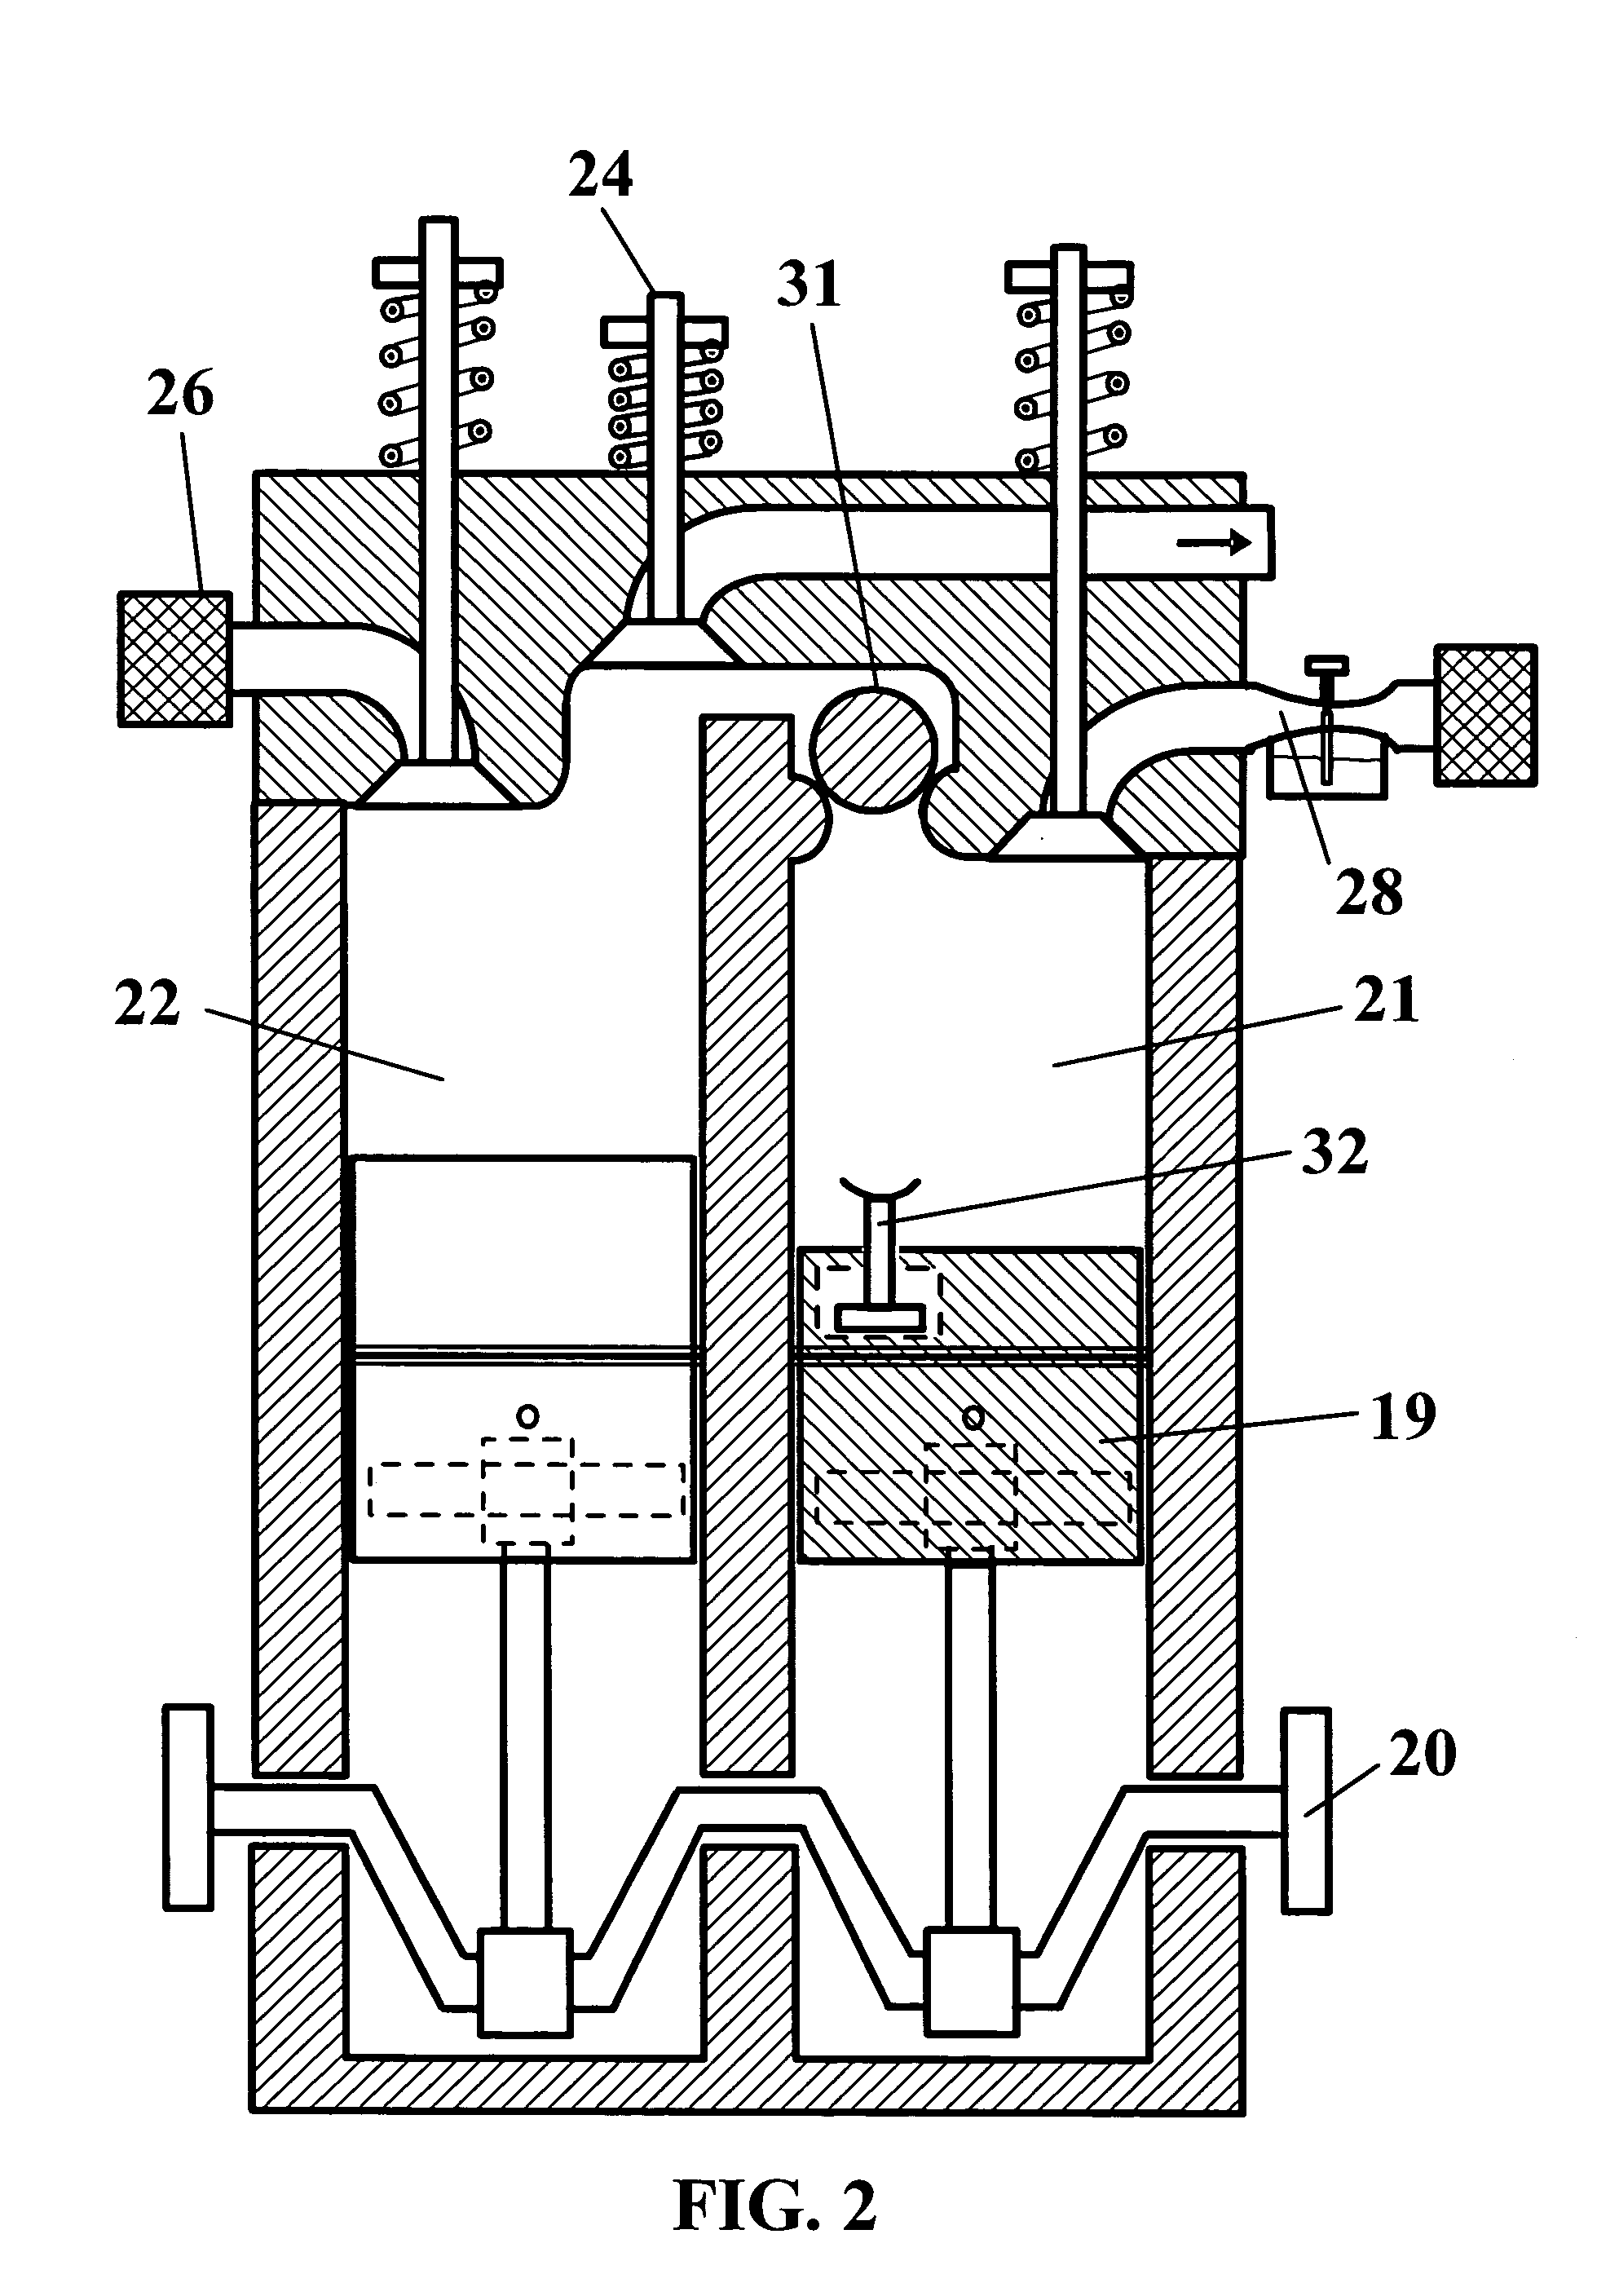 Compression ignition engine by air injection from air-only cylinder to adjacent air-fuel cylinder